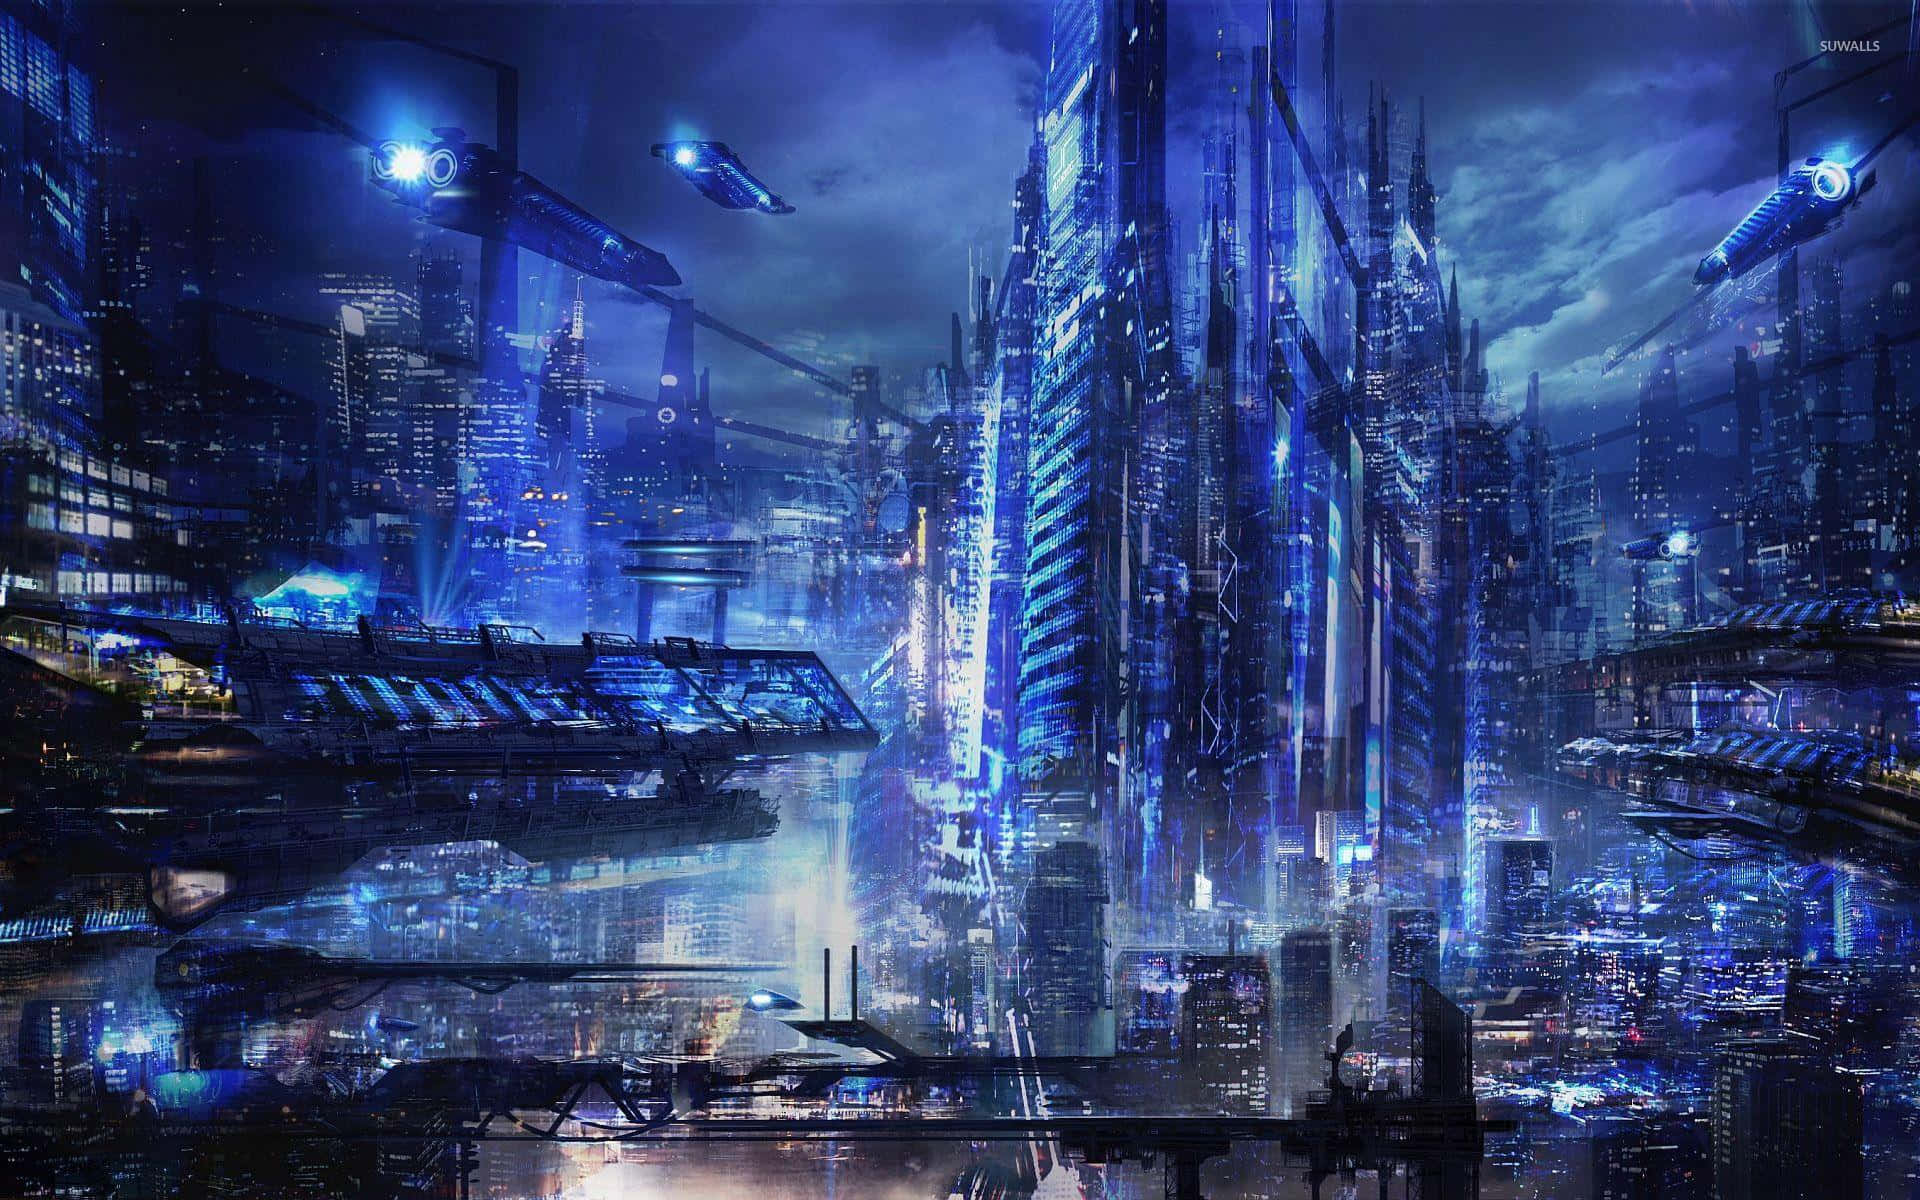 "Travel to the future with this stunning cyberpunk city background"